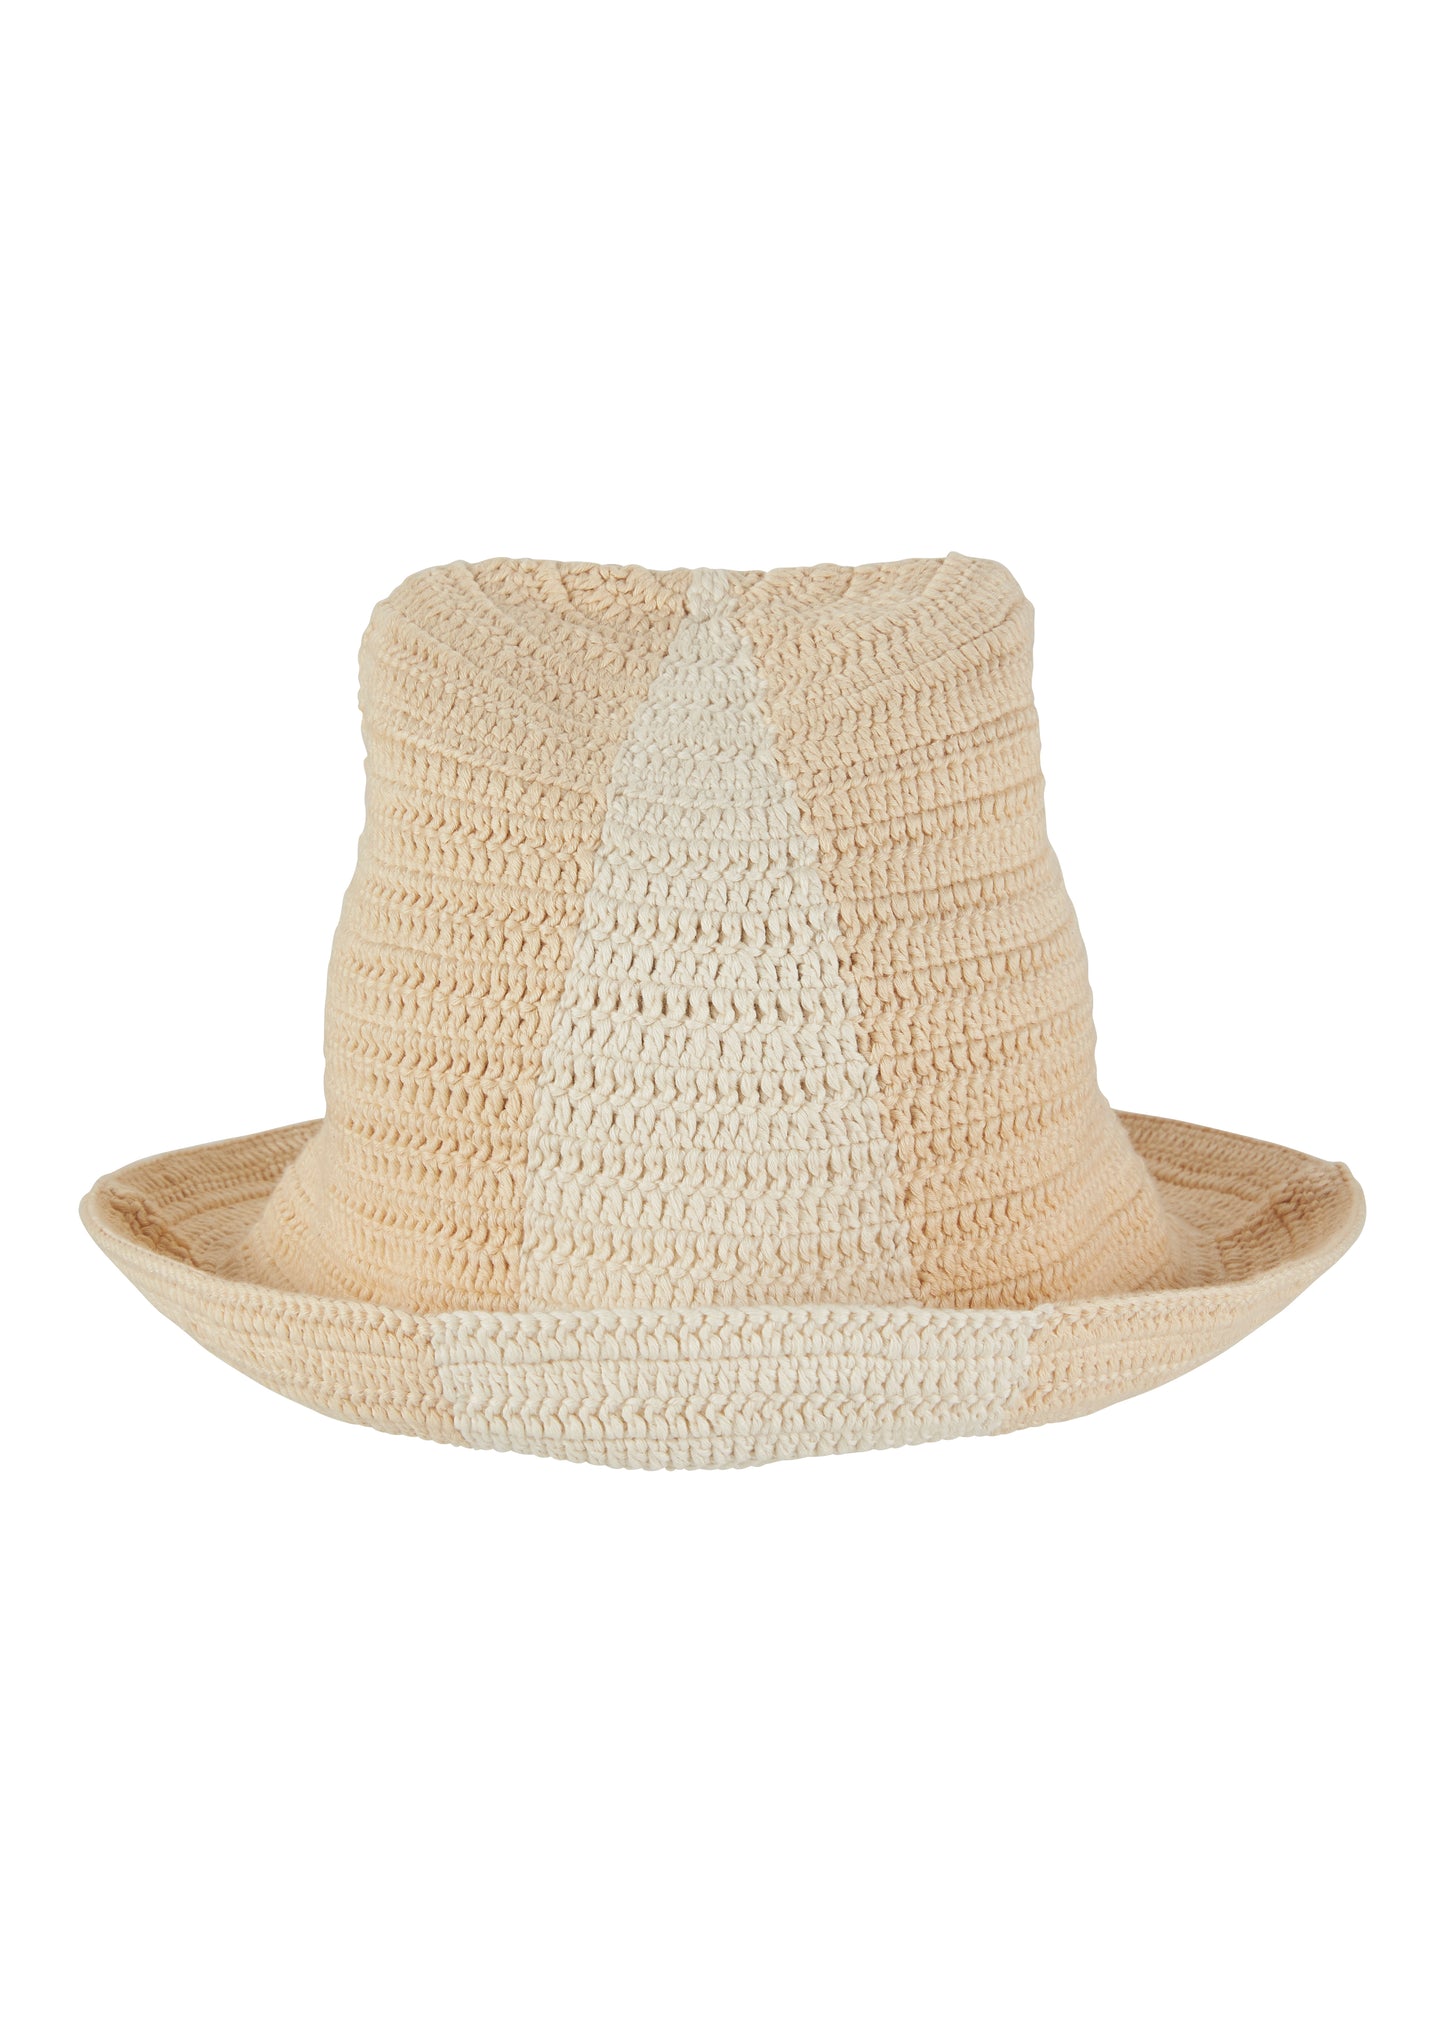 Cotton crochet bucket hat with dual stripe. Handmade sustainably from landfill diverted fibre. Soft hand feel. One size fits all.